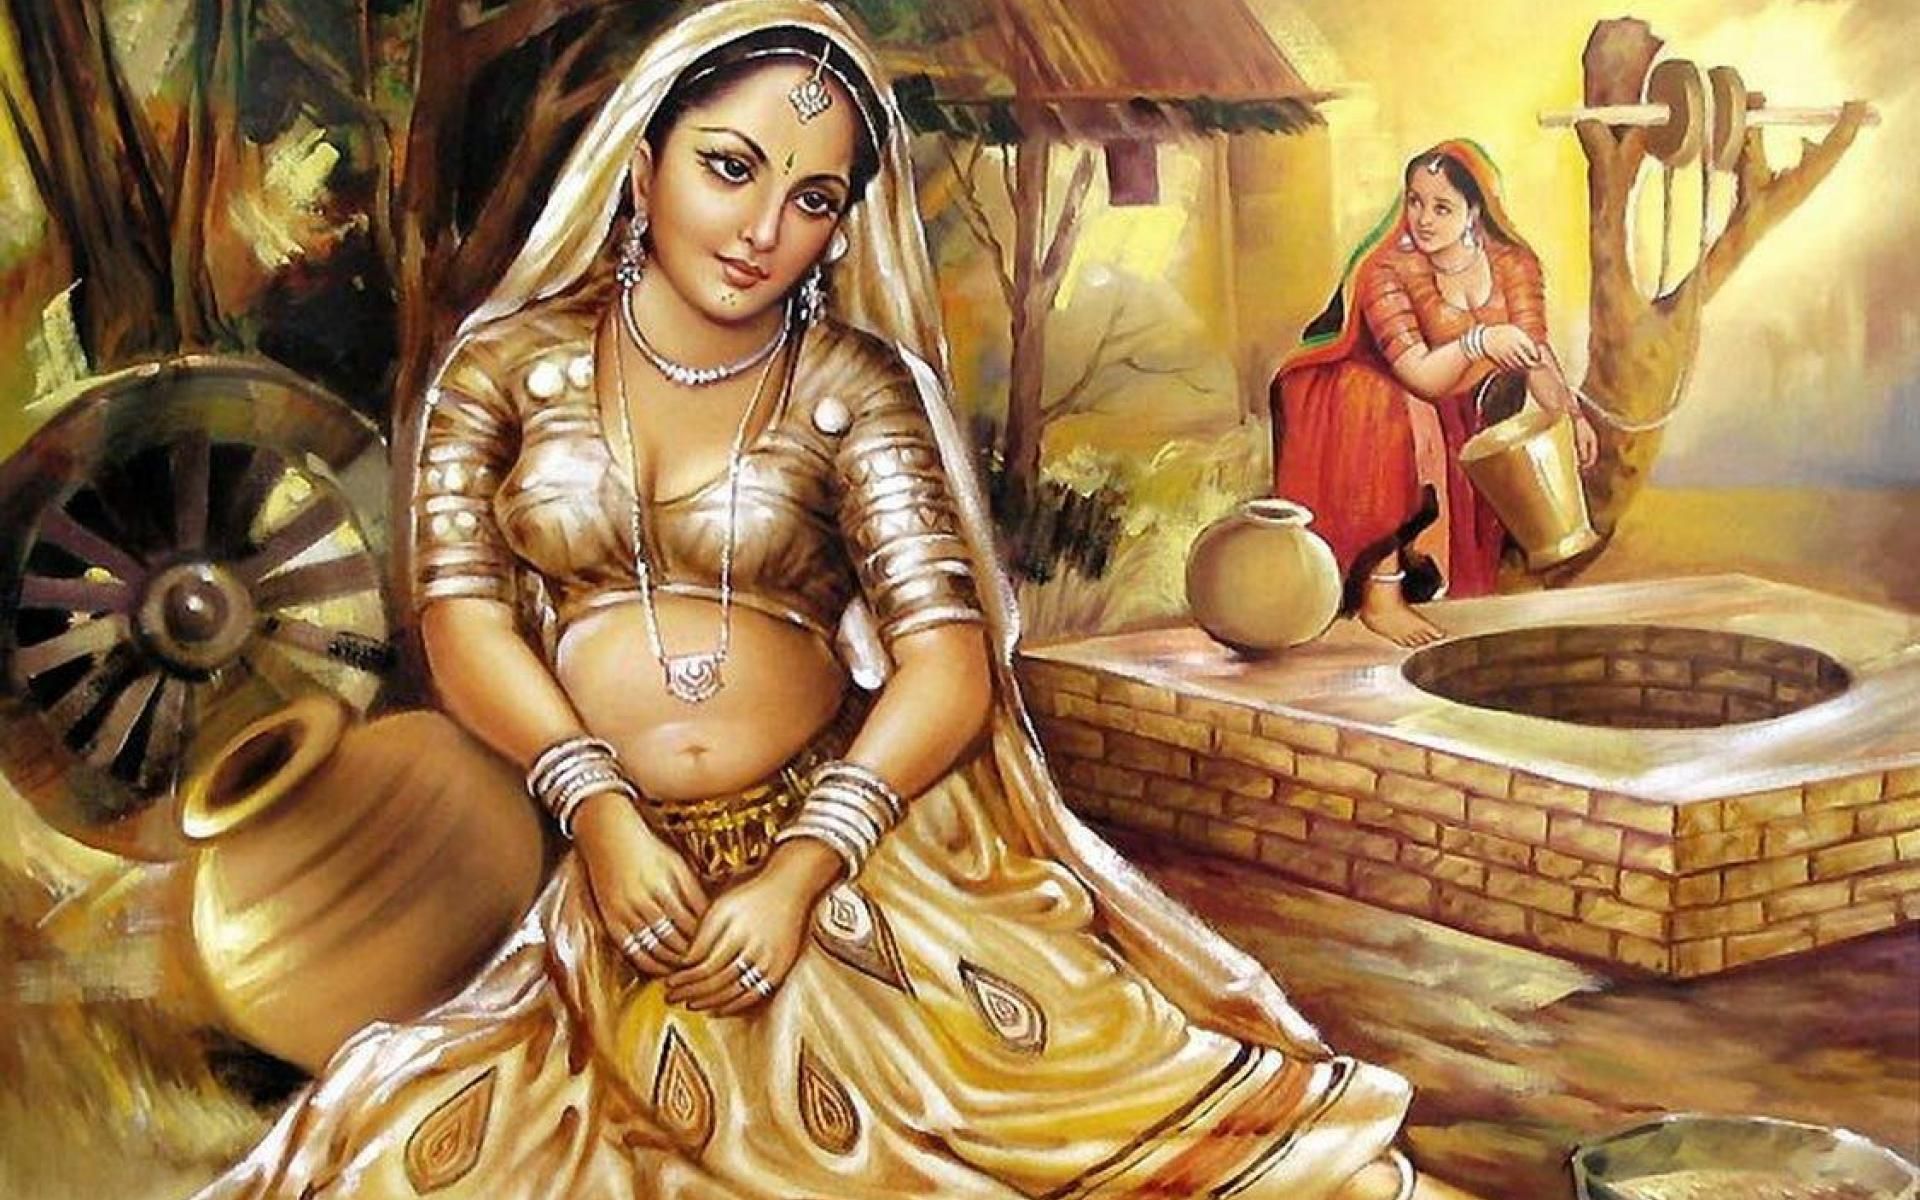 Woman Painting Of Indian Culture HD Wallpaper For Desktop. Indian